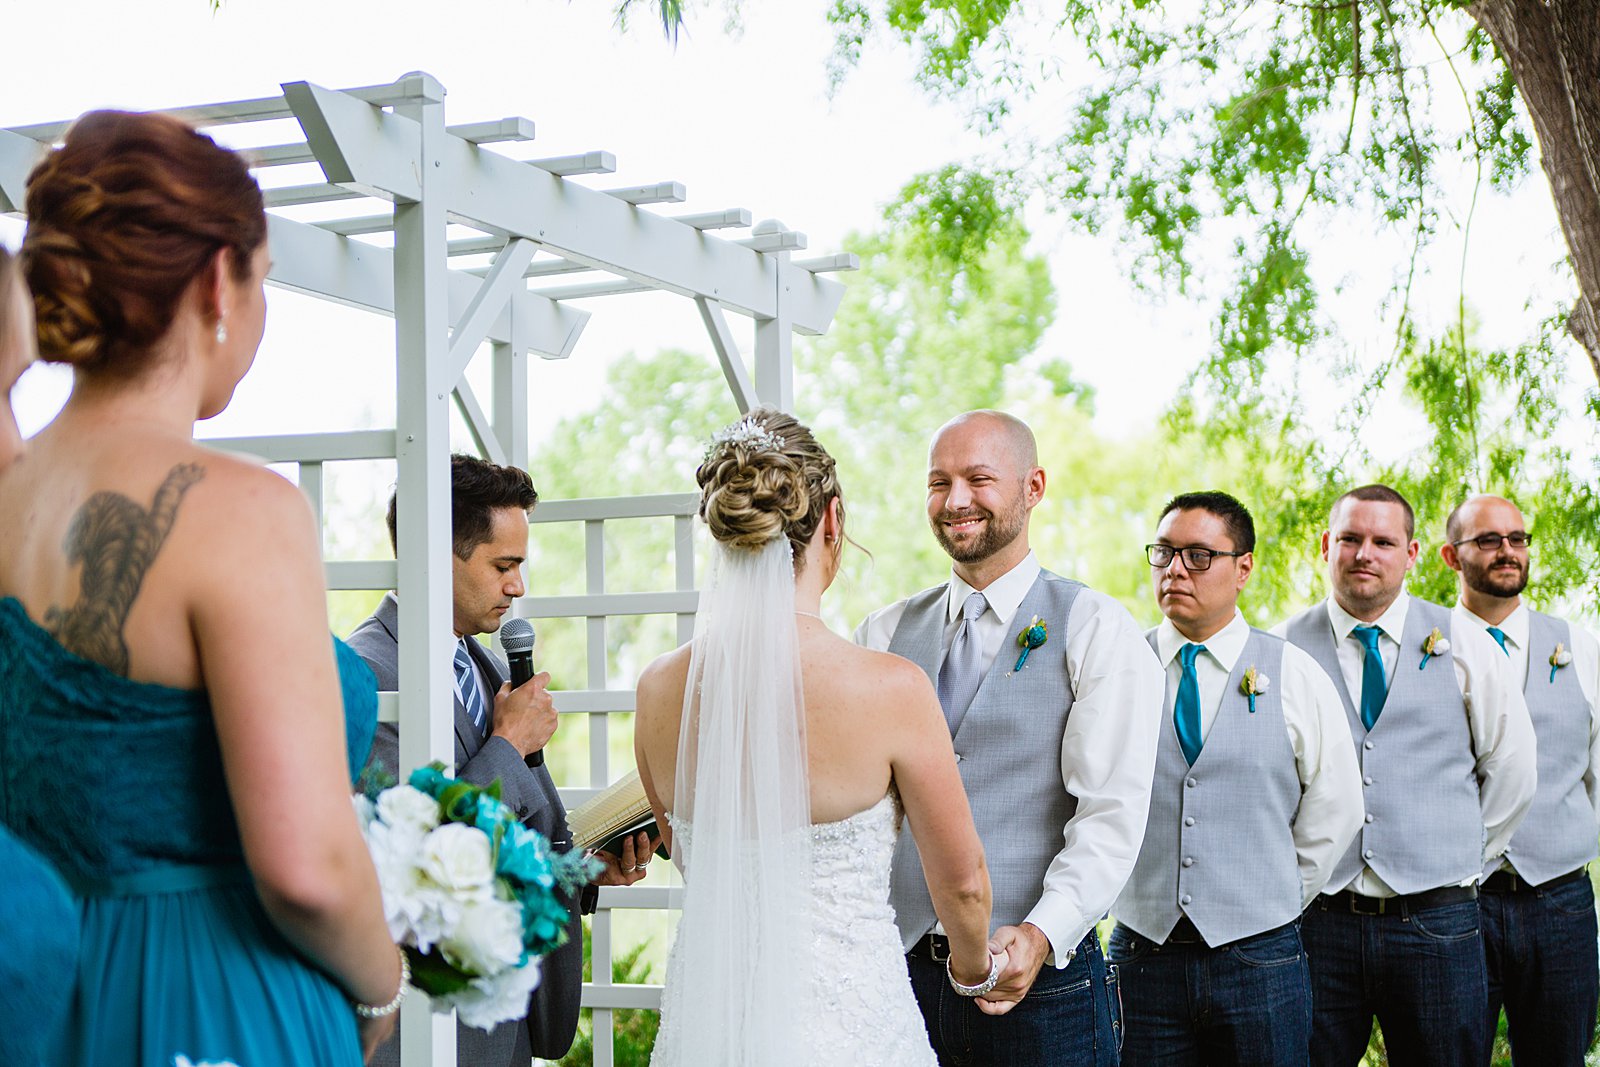 Groom looking at his bride during their wedding ceremony at The Windmill House by Chino Valley wedding photographer PMA Photography.